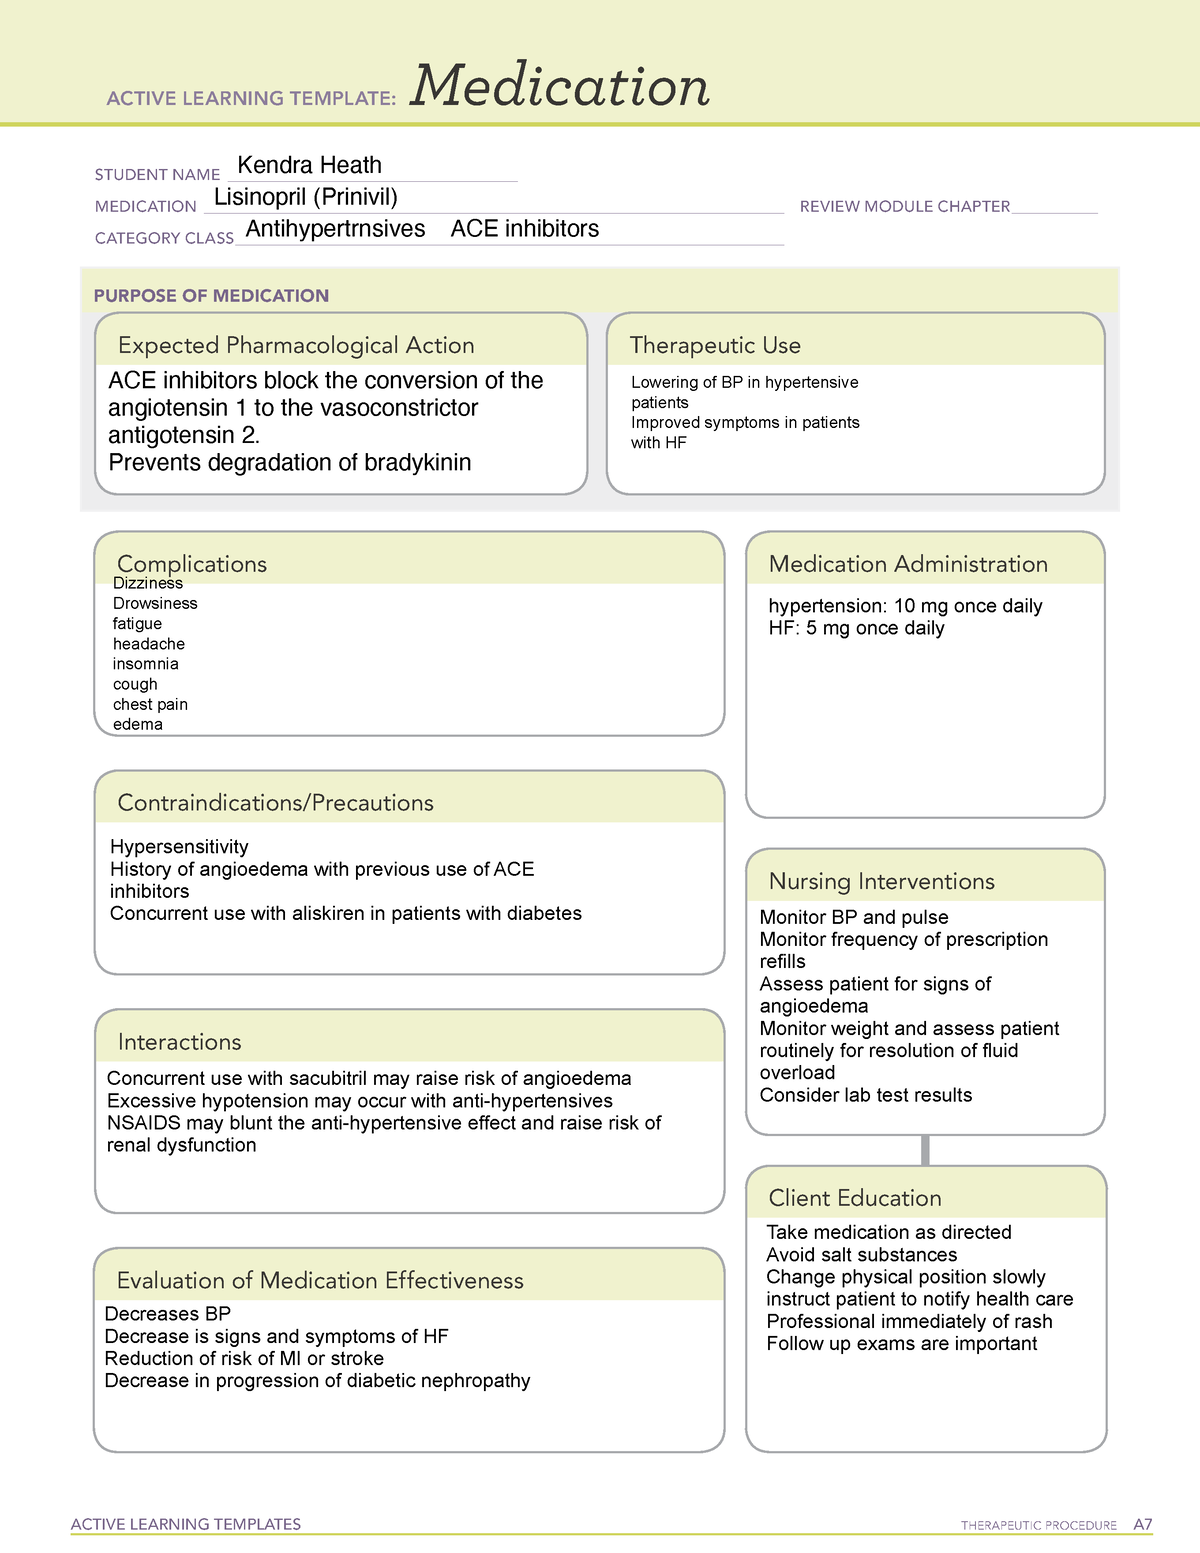 Active Learning Template Medication 5 ACTIVE LEARNING TEMPLATES 